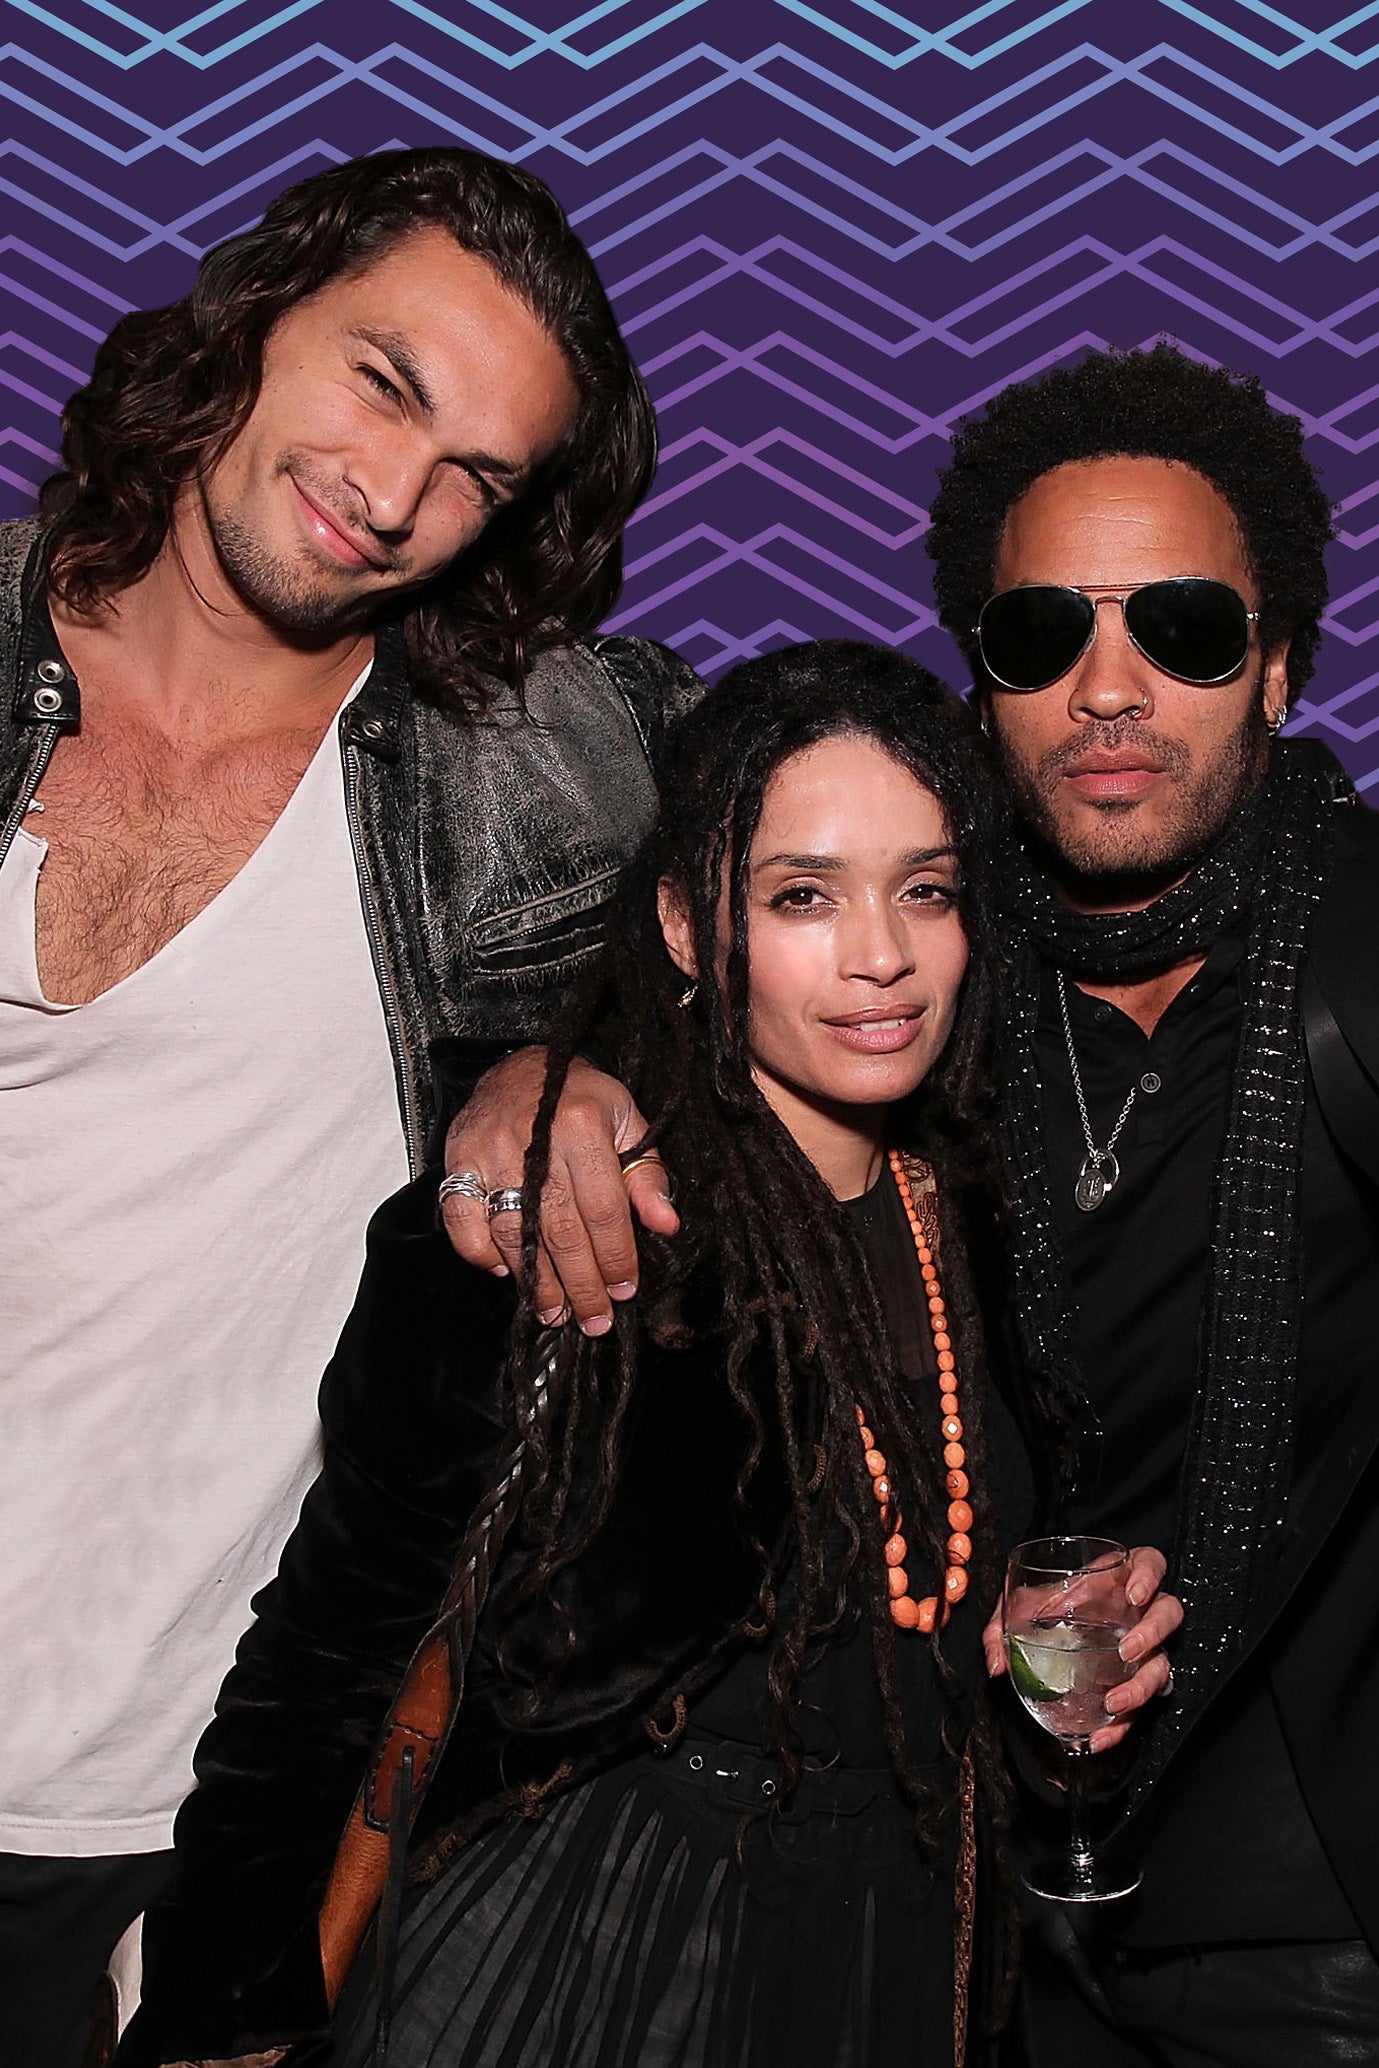 Lisa Bonet Opens Up About Husband Jason Momoa And Her Relationship With Ex Lenny Kravitz: 'It’s Full-on Family Love'
